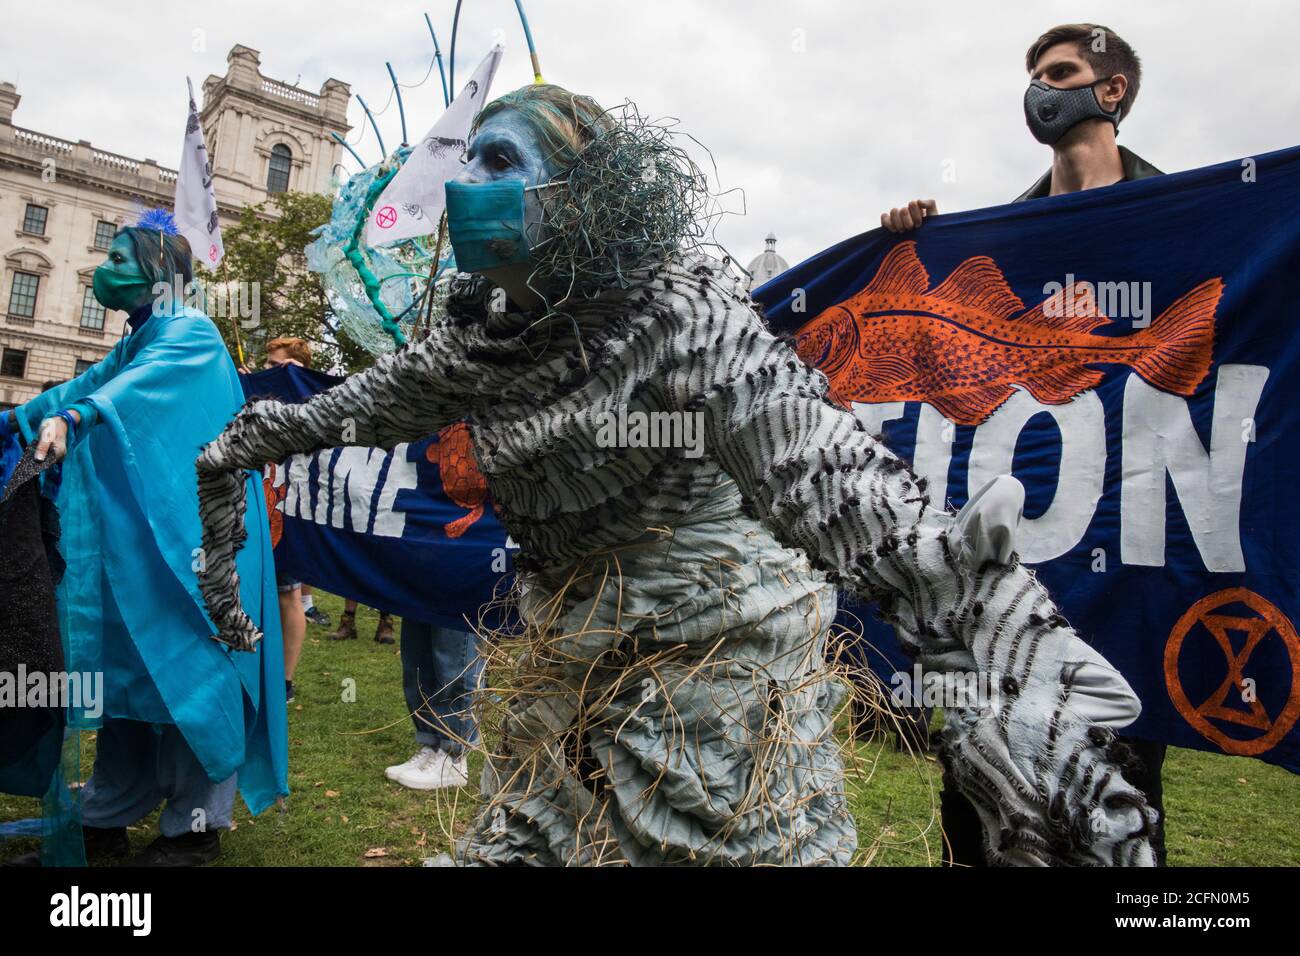 London, UK. 6th September, 2020. Climate activists from the Ocean Rebellion and Extinction Rebellion prepare to take part in a colourful Marine Extinction March. The activists, who are attending a series of September Rebellion protests around the UK, are demanding environmental protections for the oceans and calling for an end to global governmental inaction to save the seas. Credit: Mark Kerrison/Alamy Live News Stock Photo